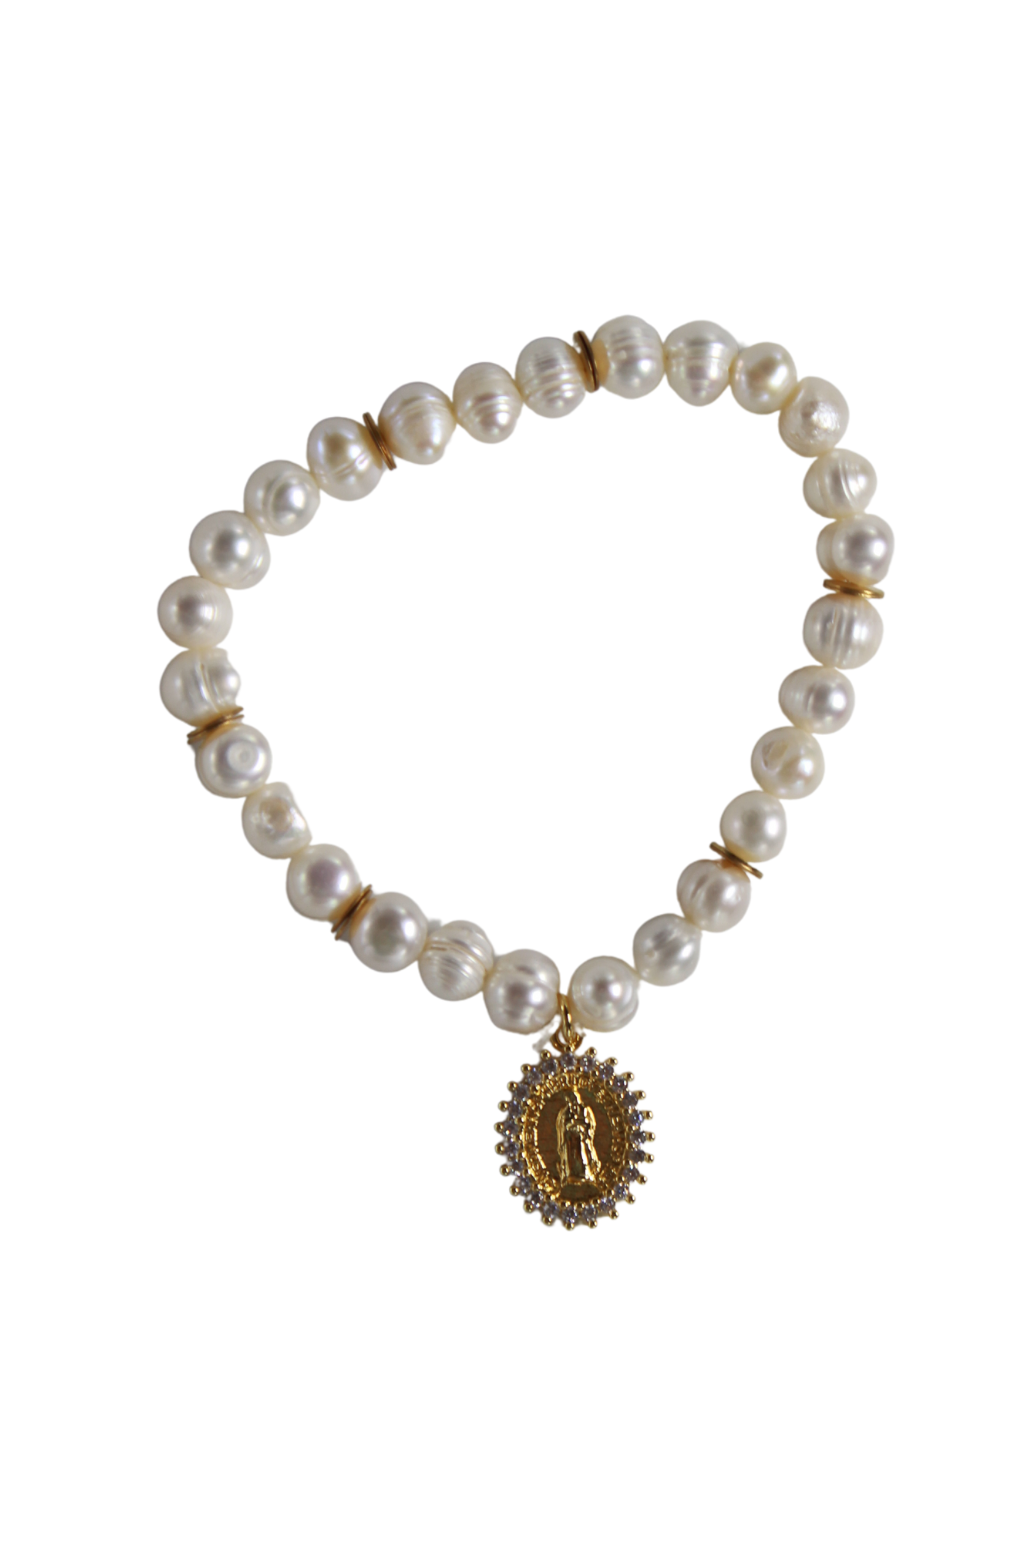 Pearl Mary Bracelet by Annie Claire Designs - SoSis